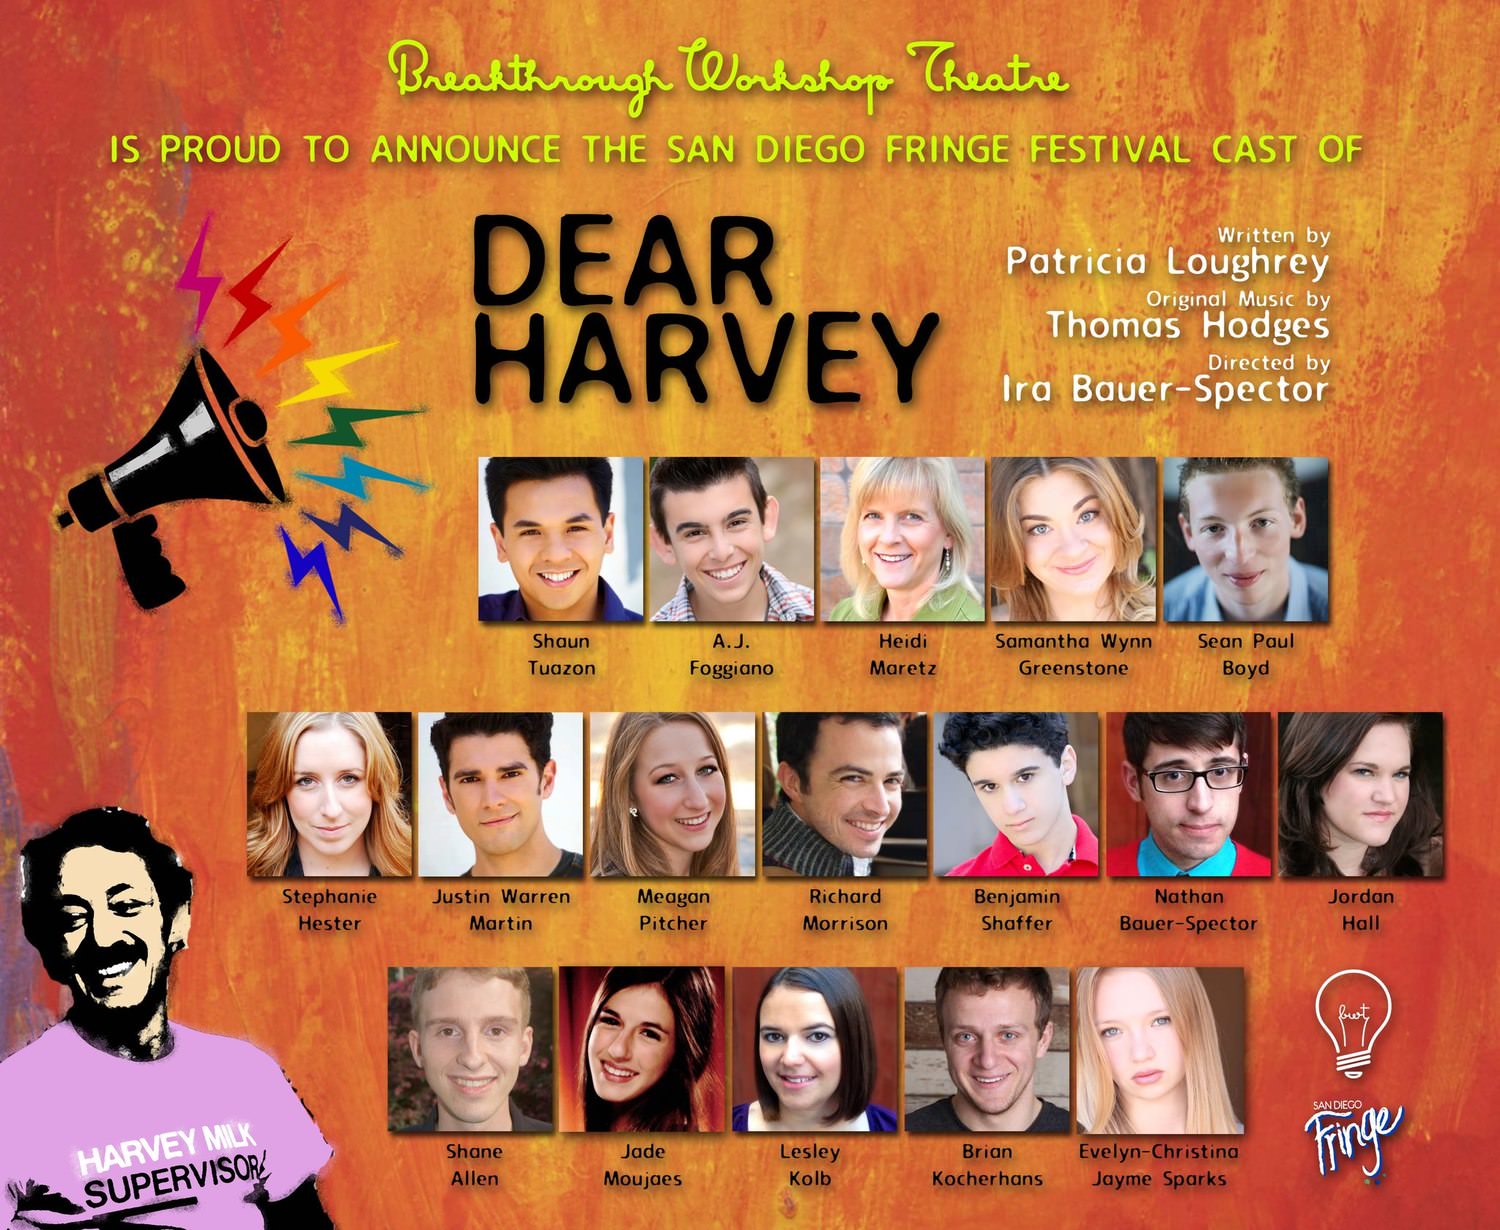 Breakthrough Workshop Theatre to Bring the Legacy of Harvey Milk to the 1st San Diego Fringe Festival with DEAR HARVEY 1